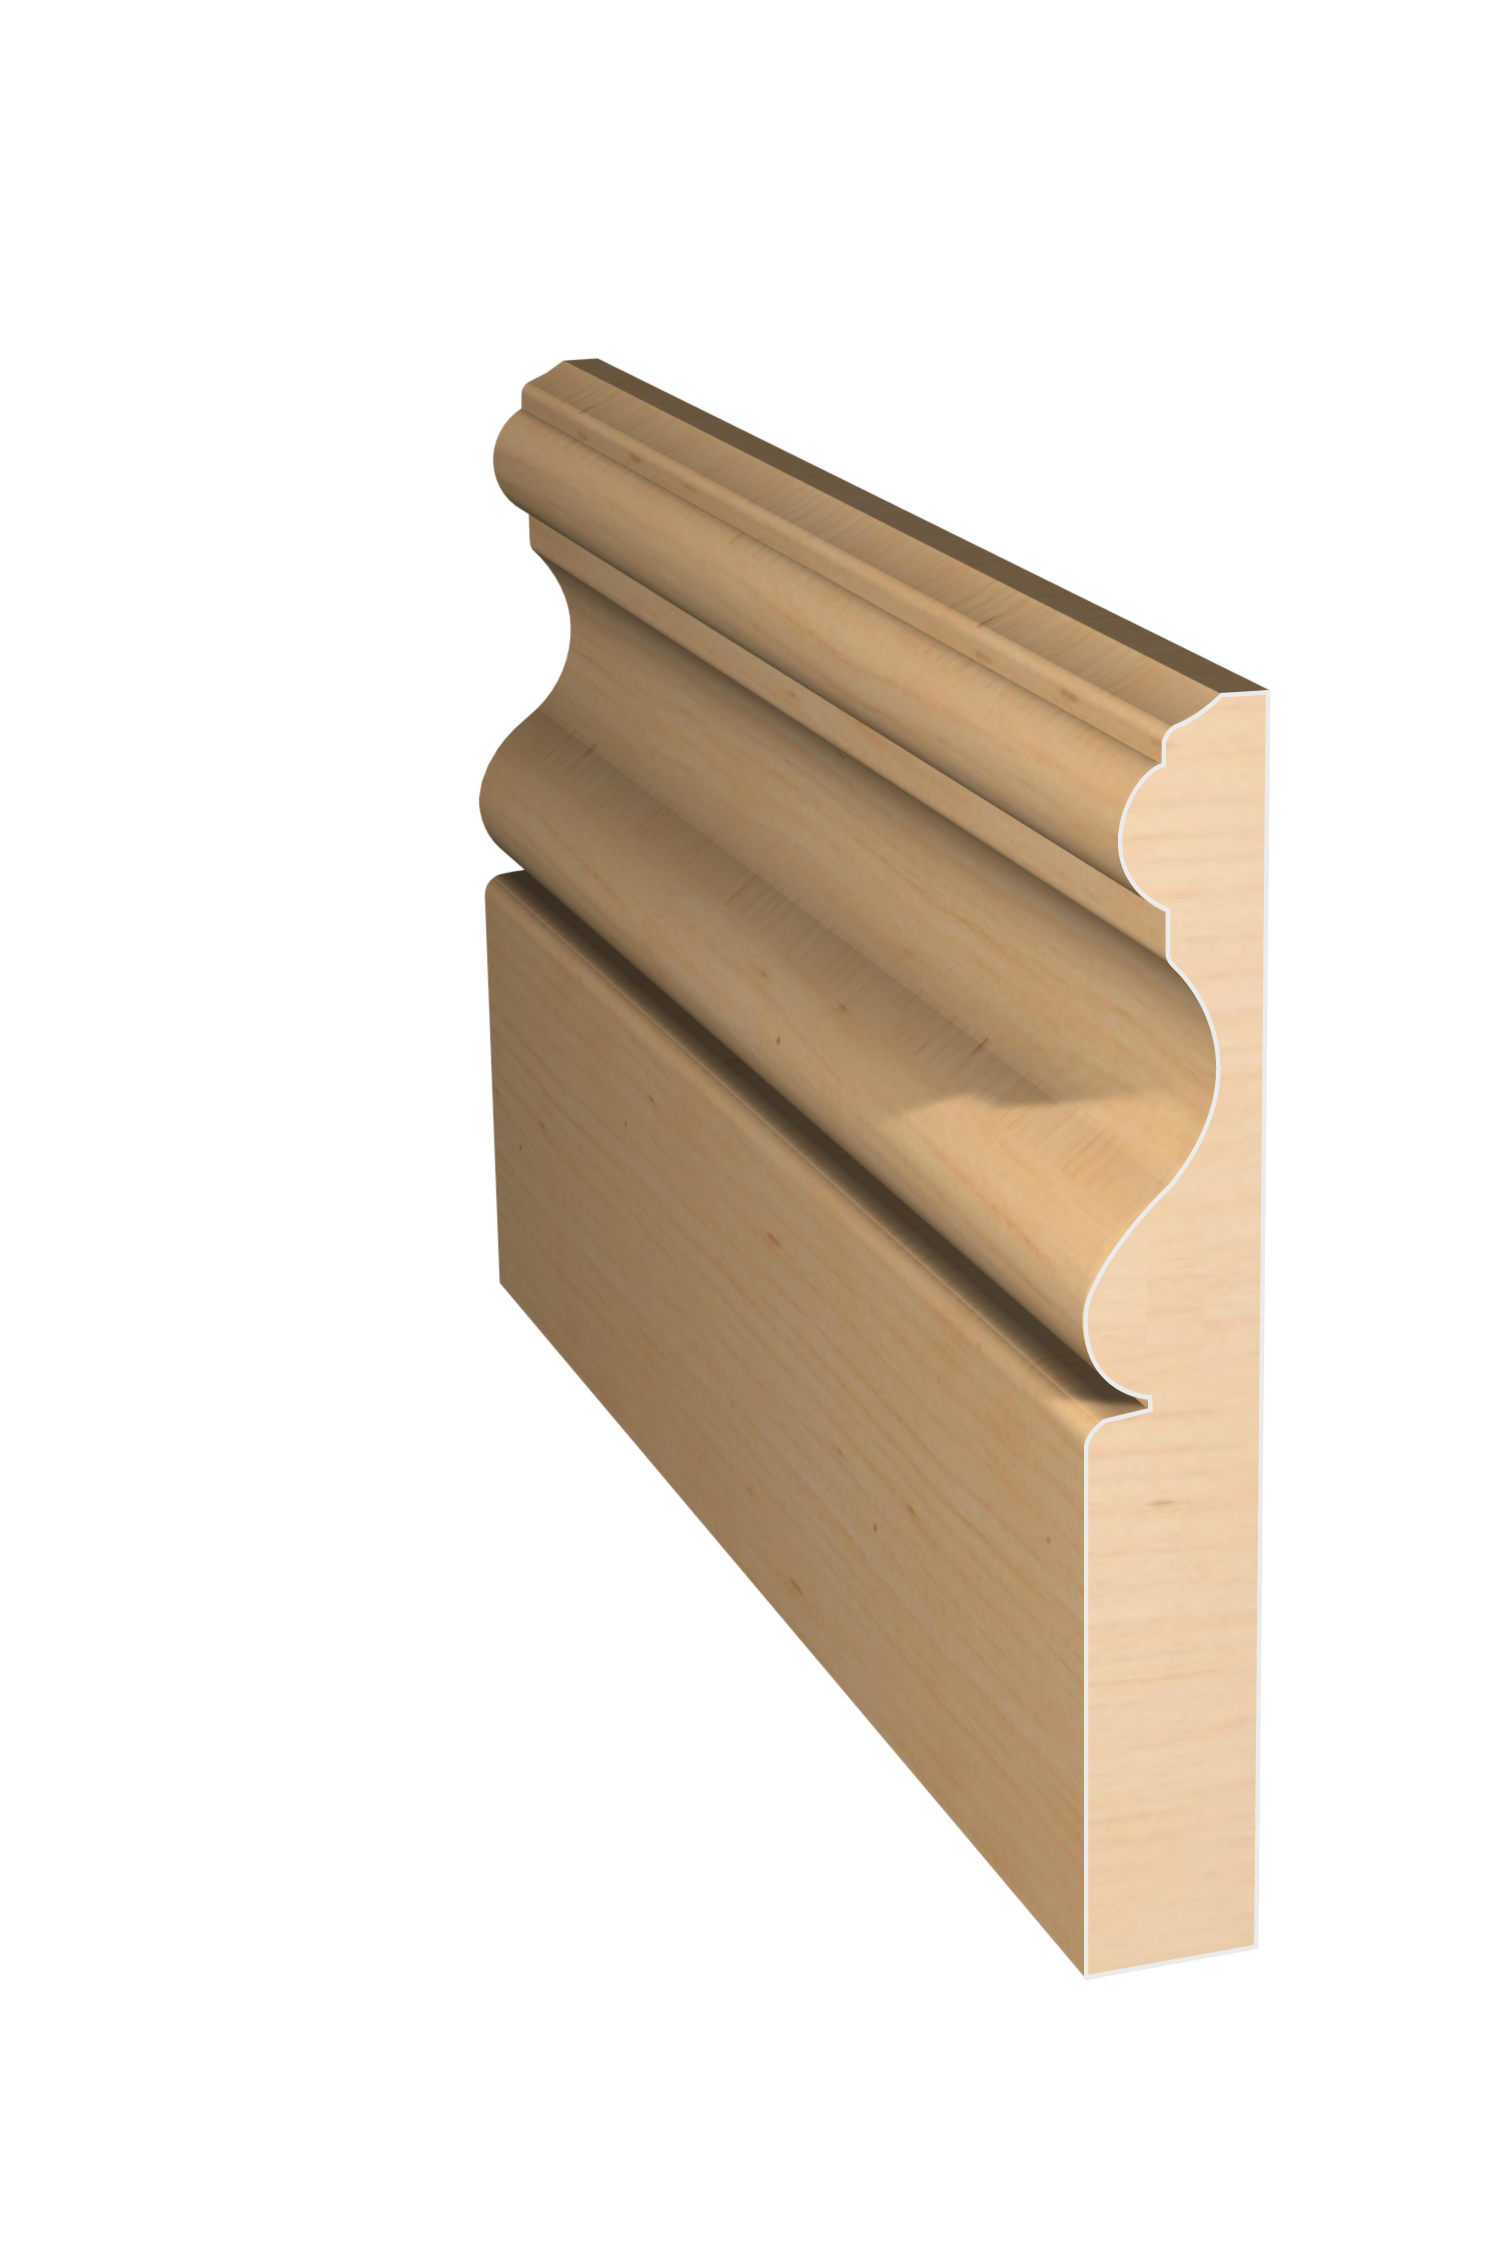 Three dimensional rendering of custom casing wood molding CAPL31239 made by Public Lumber Company in Detroit.